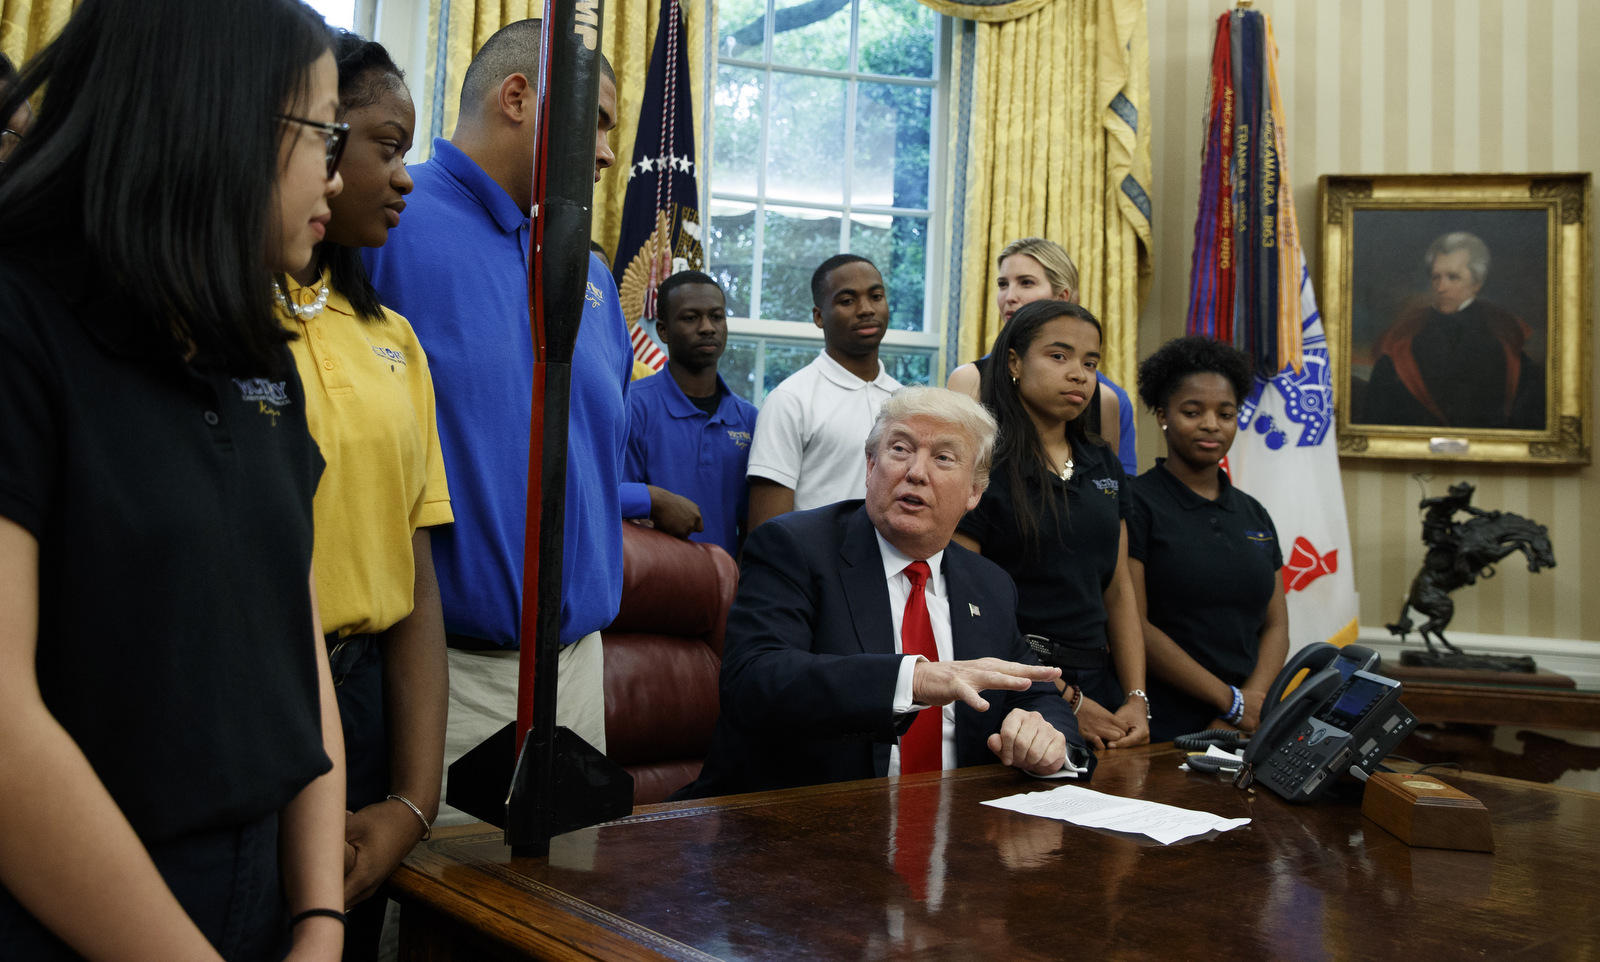 President Donald Trump speaks to members of the rocket team from Victory Christian Center School in Charlotte, N.C., May 12, 2017, in the Oval Office of the White House in Washington. (AP/Evan Vucci)